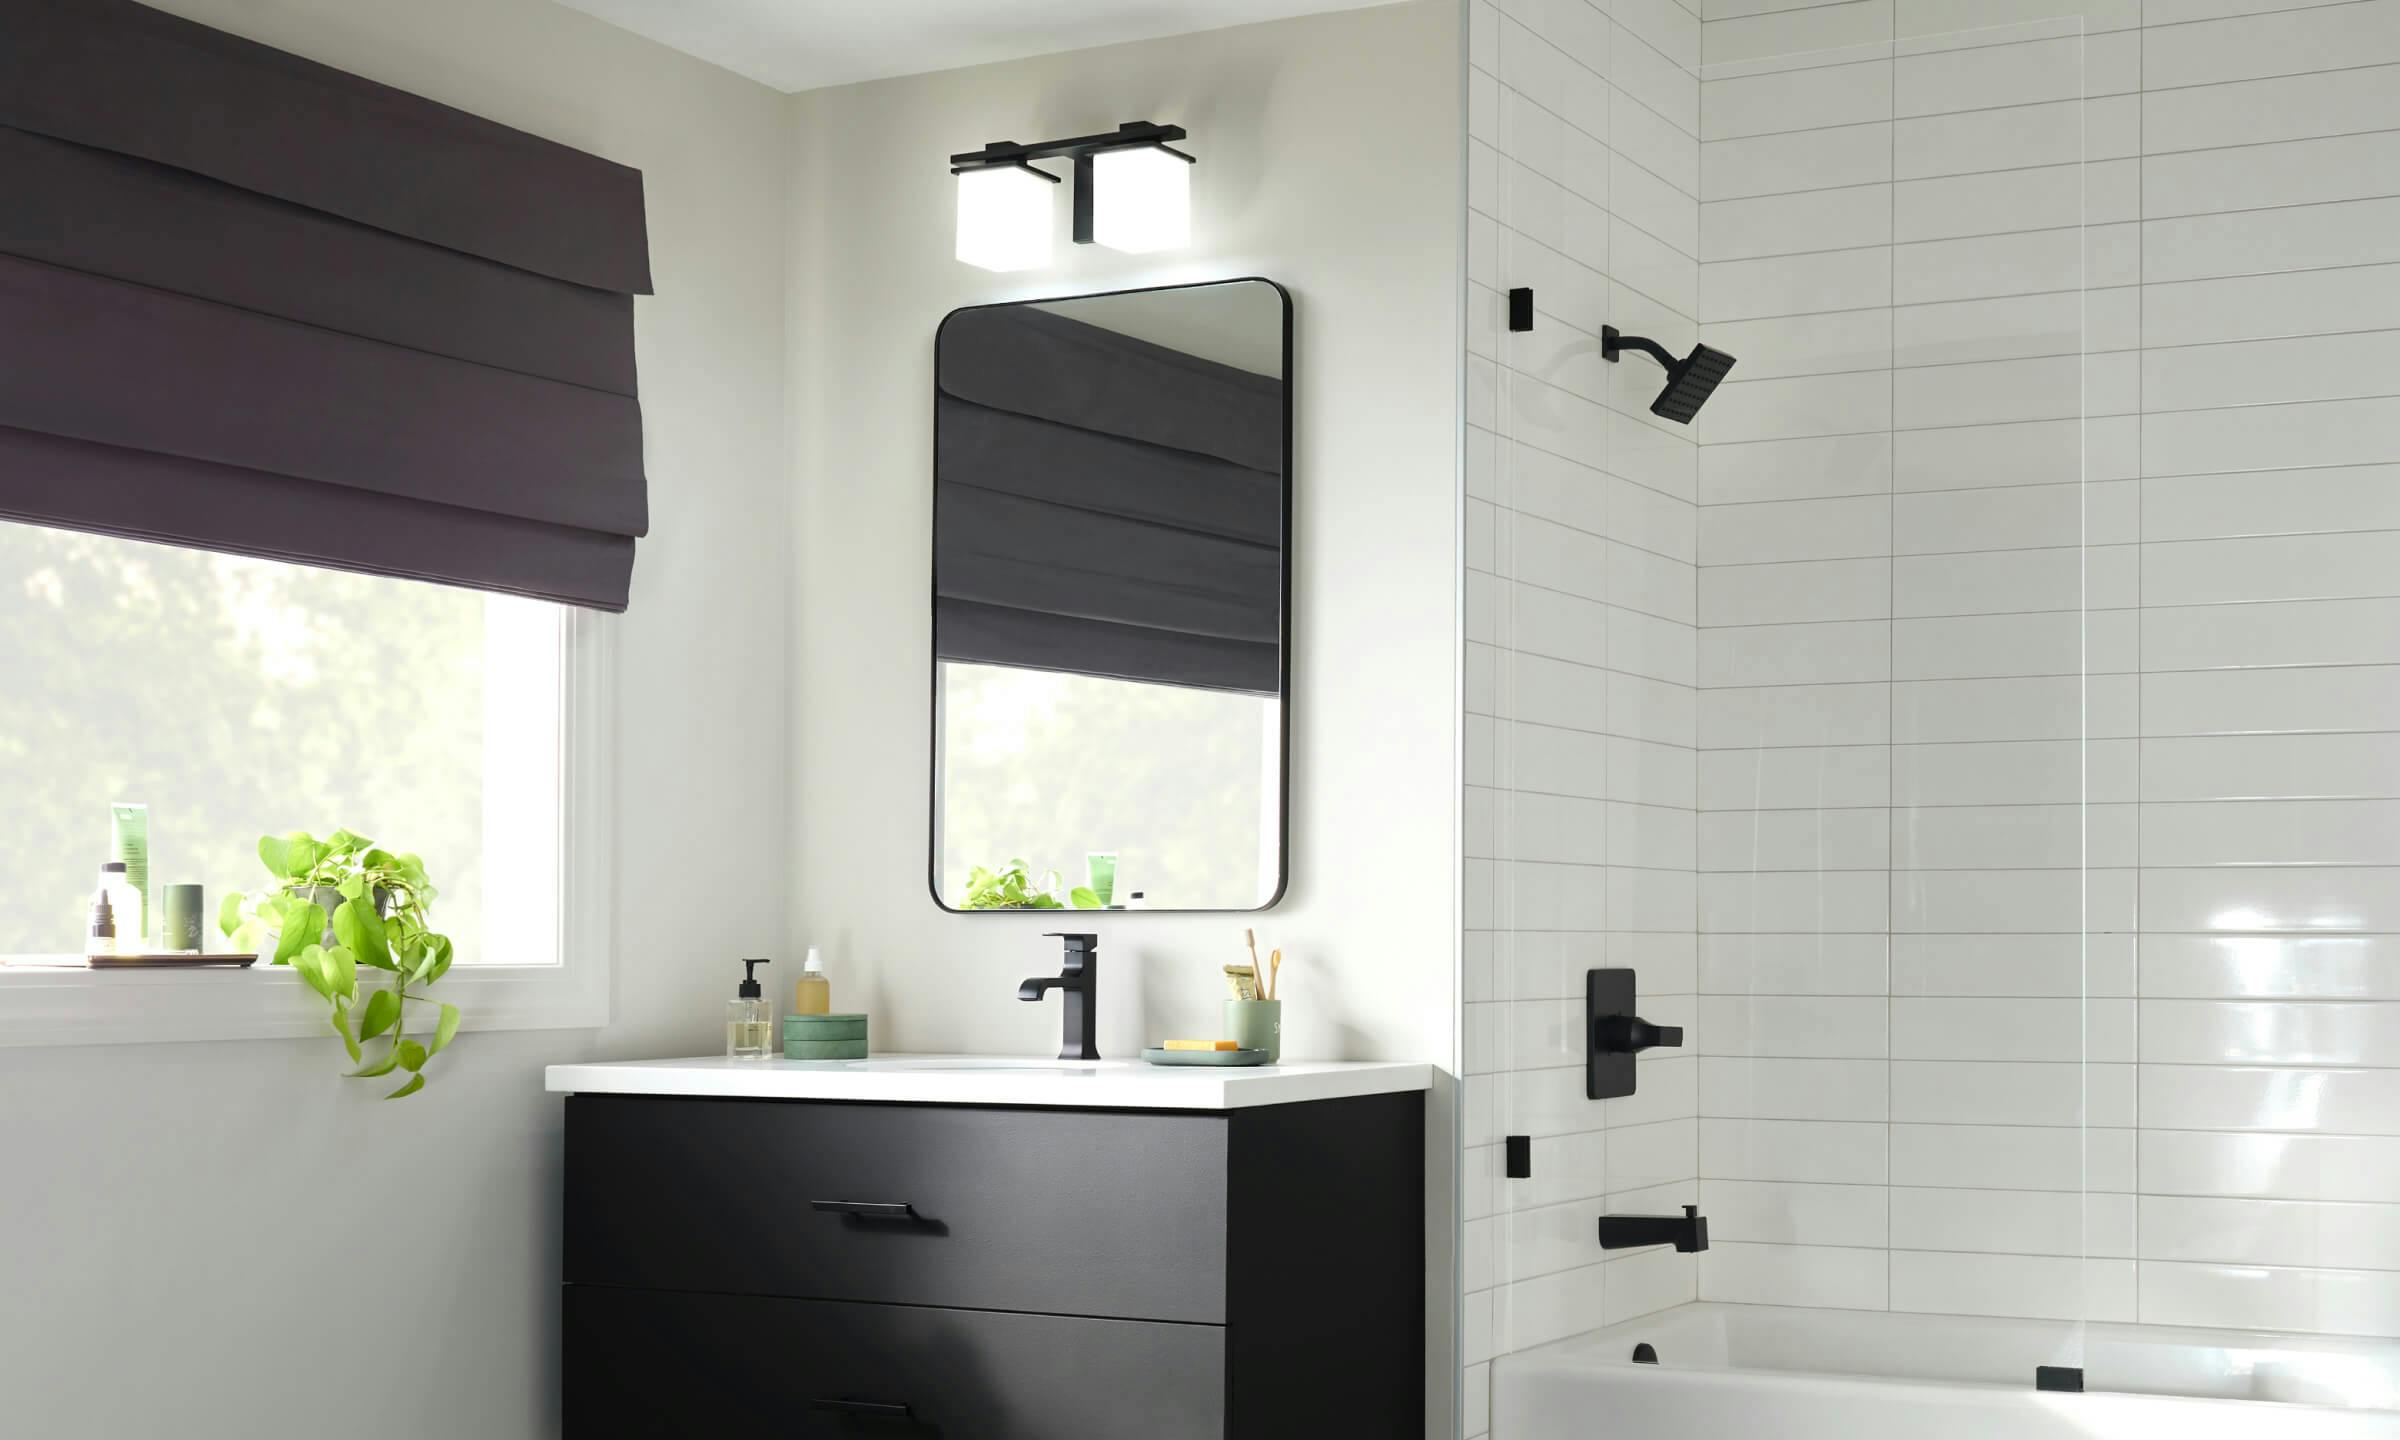 A bathroom lit with a Tully sconce with a black finish matching the Delta faucets and shower heads during the day 